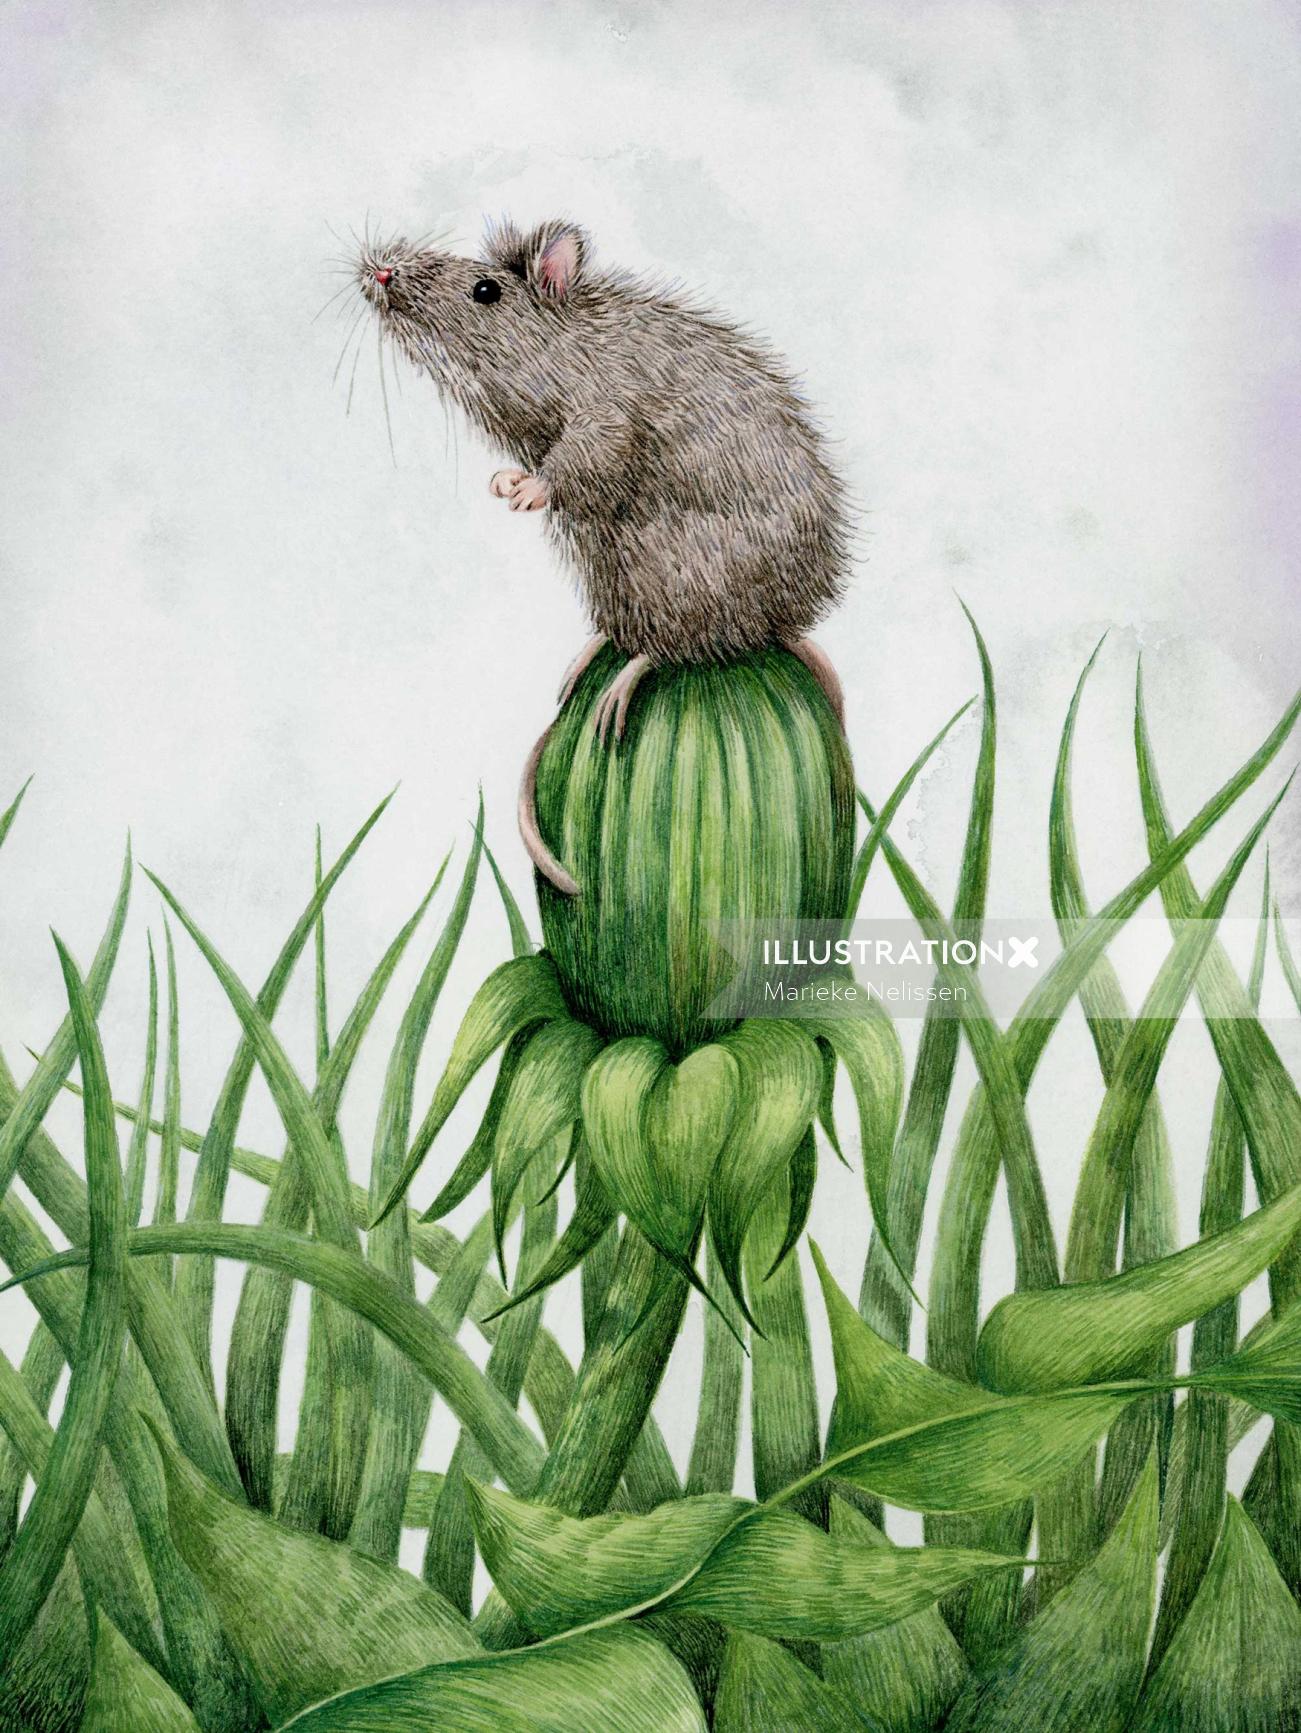 Mouse on the button of a dandelion.